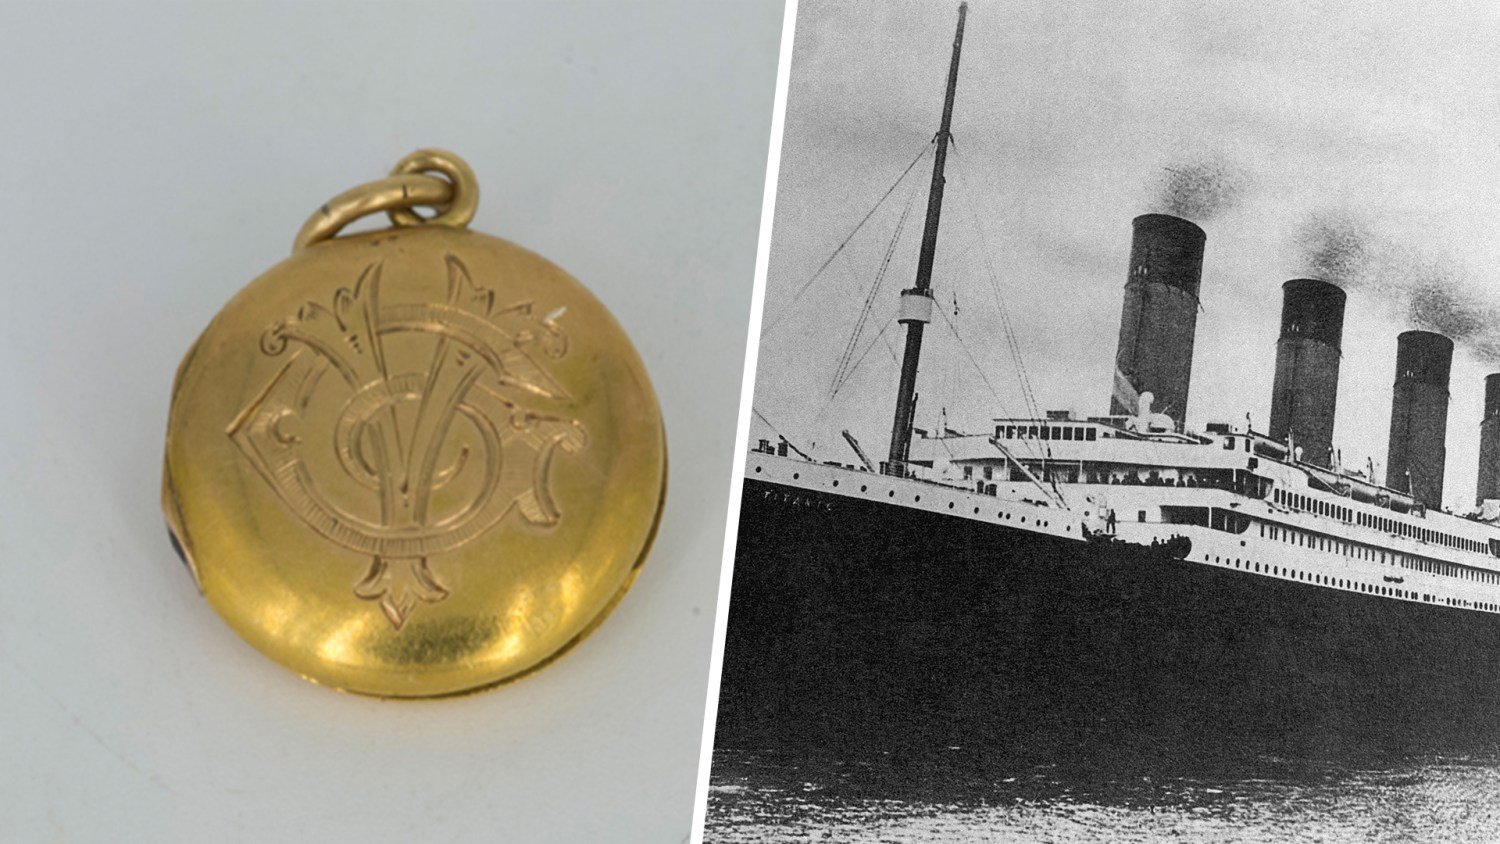 A suitcase belonging to the Titanic's last survivor has been discovered